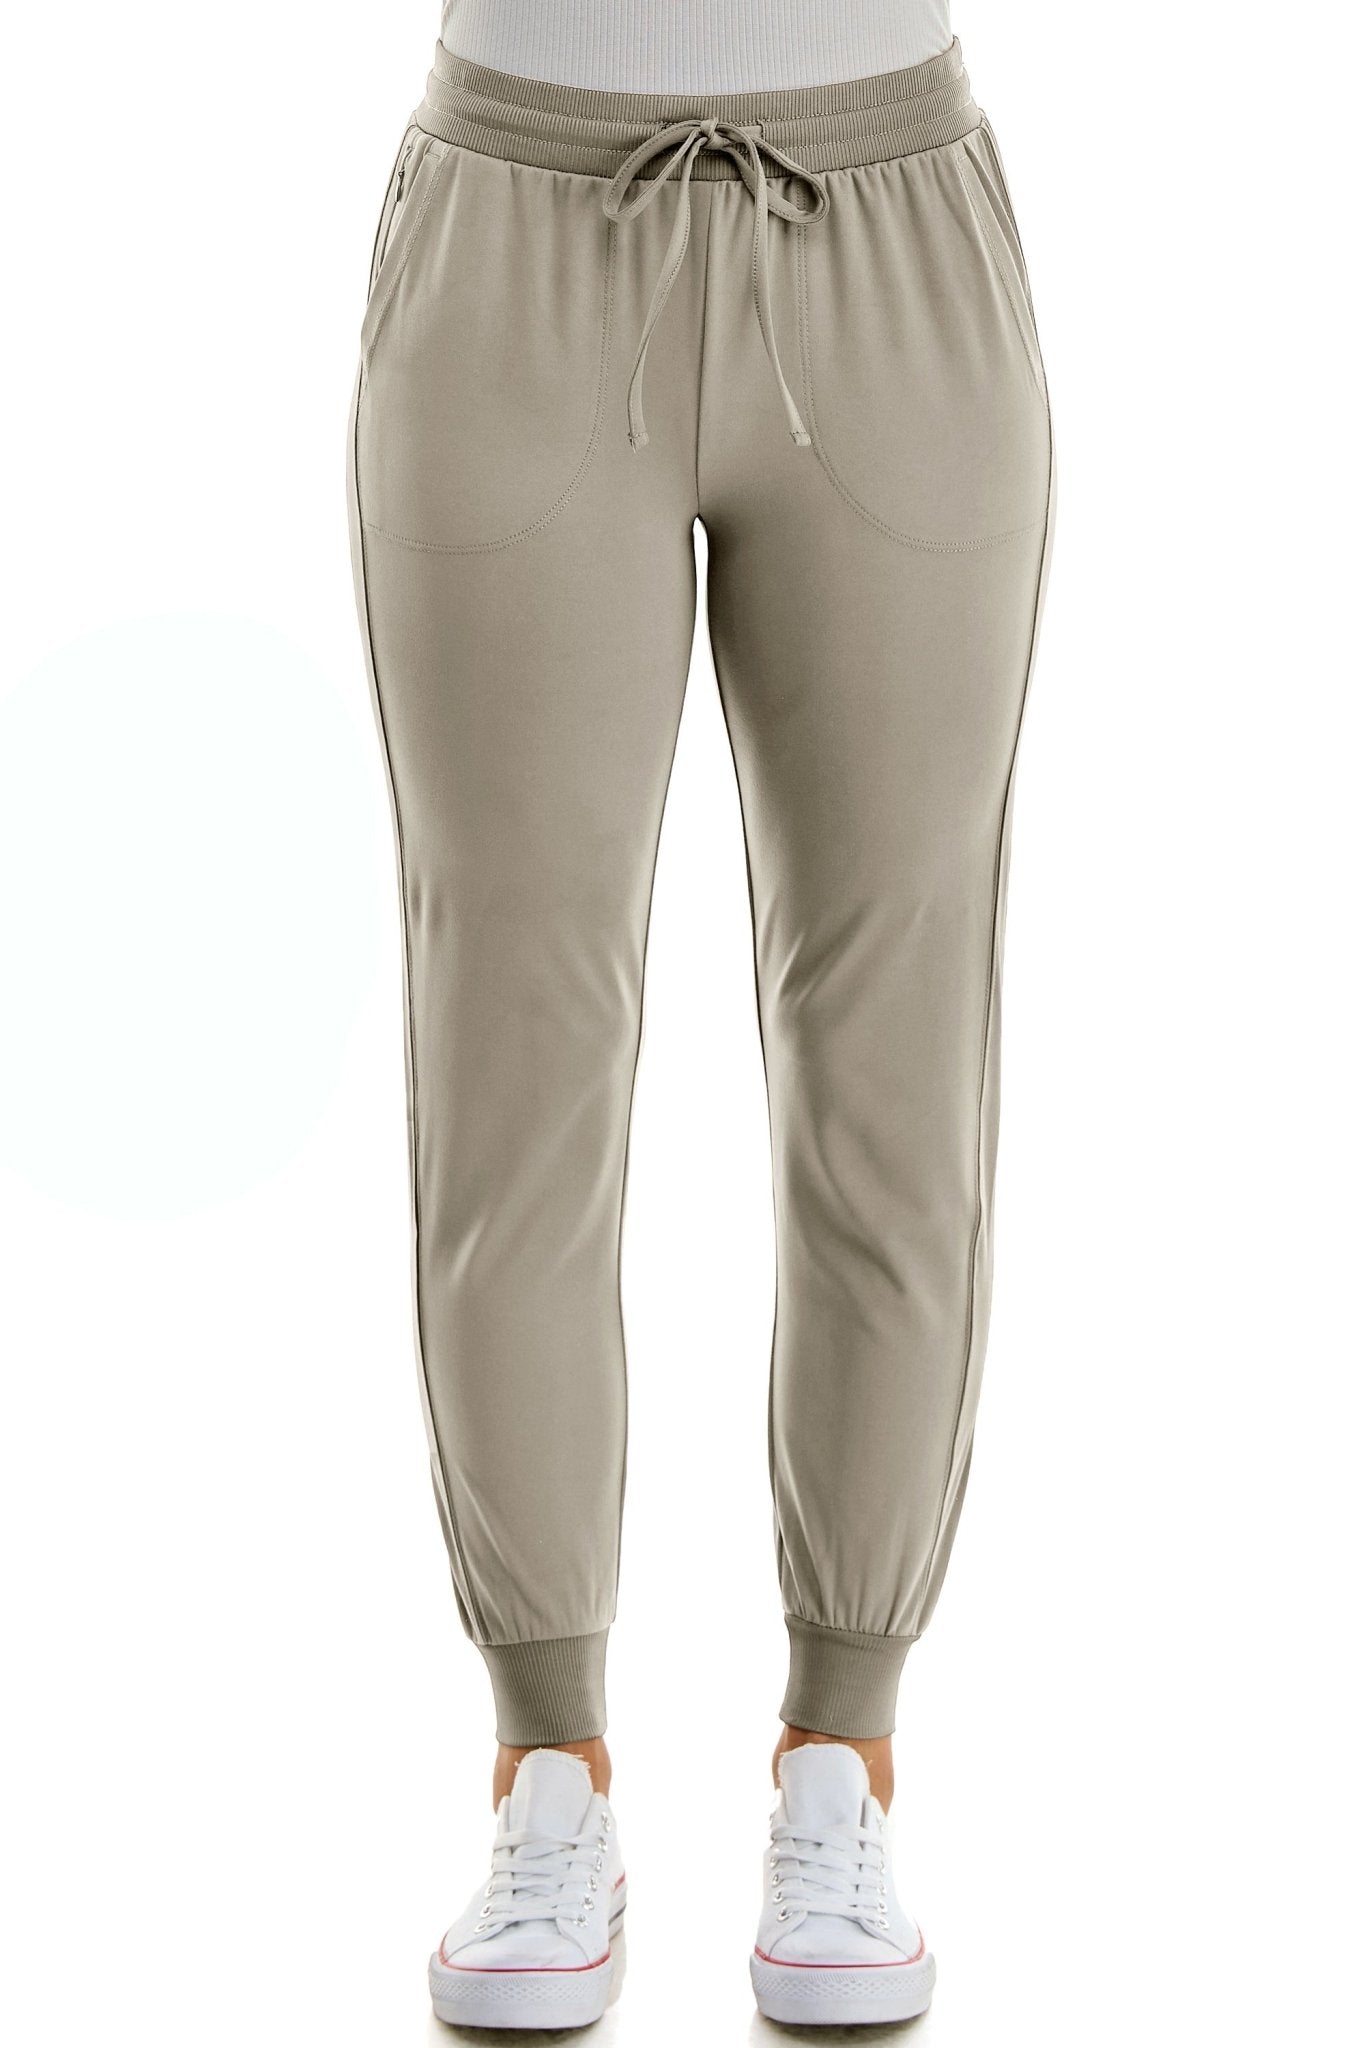 Zac & Rachel Women's Pull on Jogger Pant with Tie Front and Side Pockets - DressbarnPants